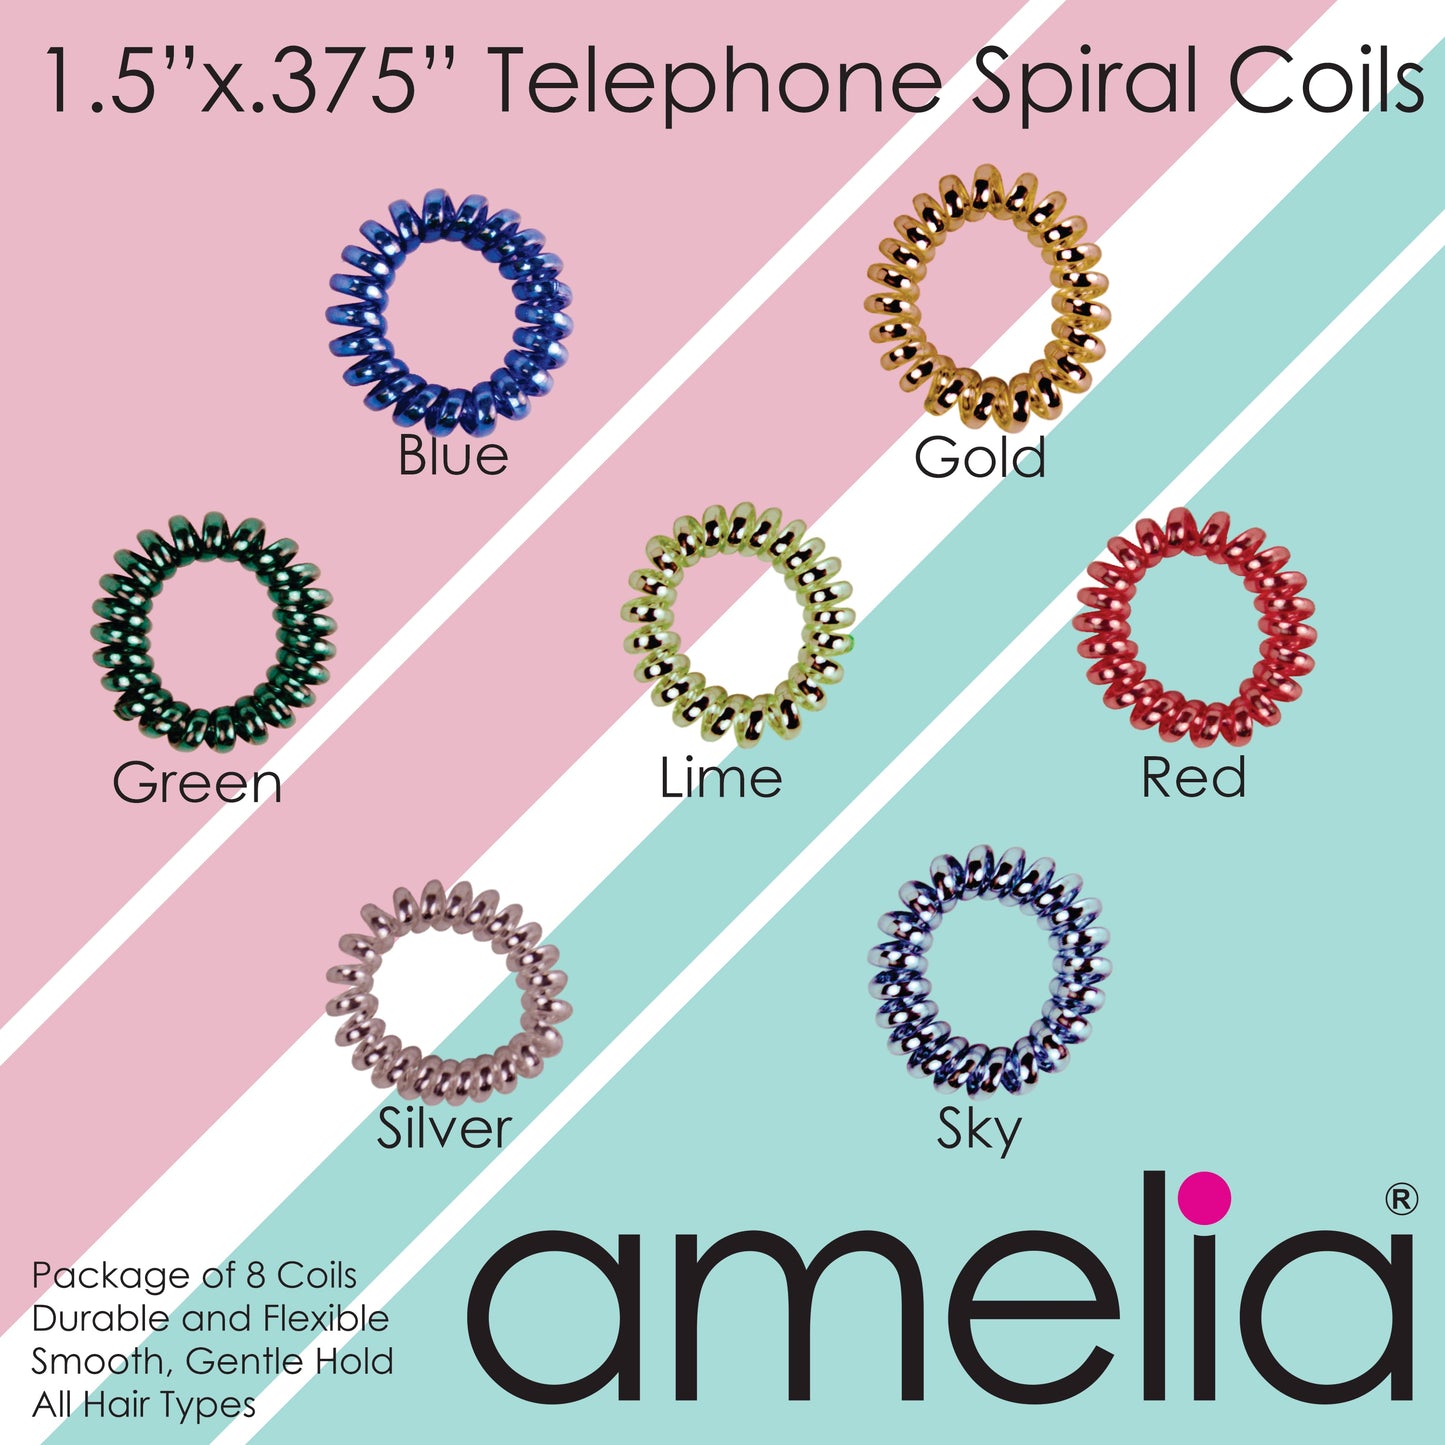 Amelia Beauty, 8 Small Shinny Elastic Hair Telephone Cord Coils, 1.5in Diameter Spiral Hair Ties, Strong Hold, Gentle on Hair, Blue